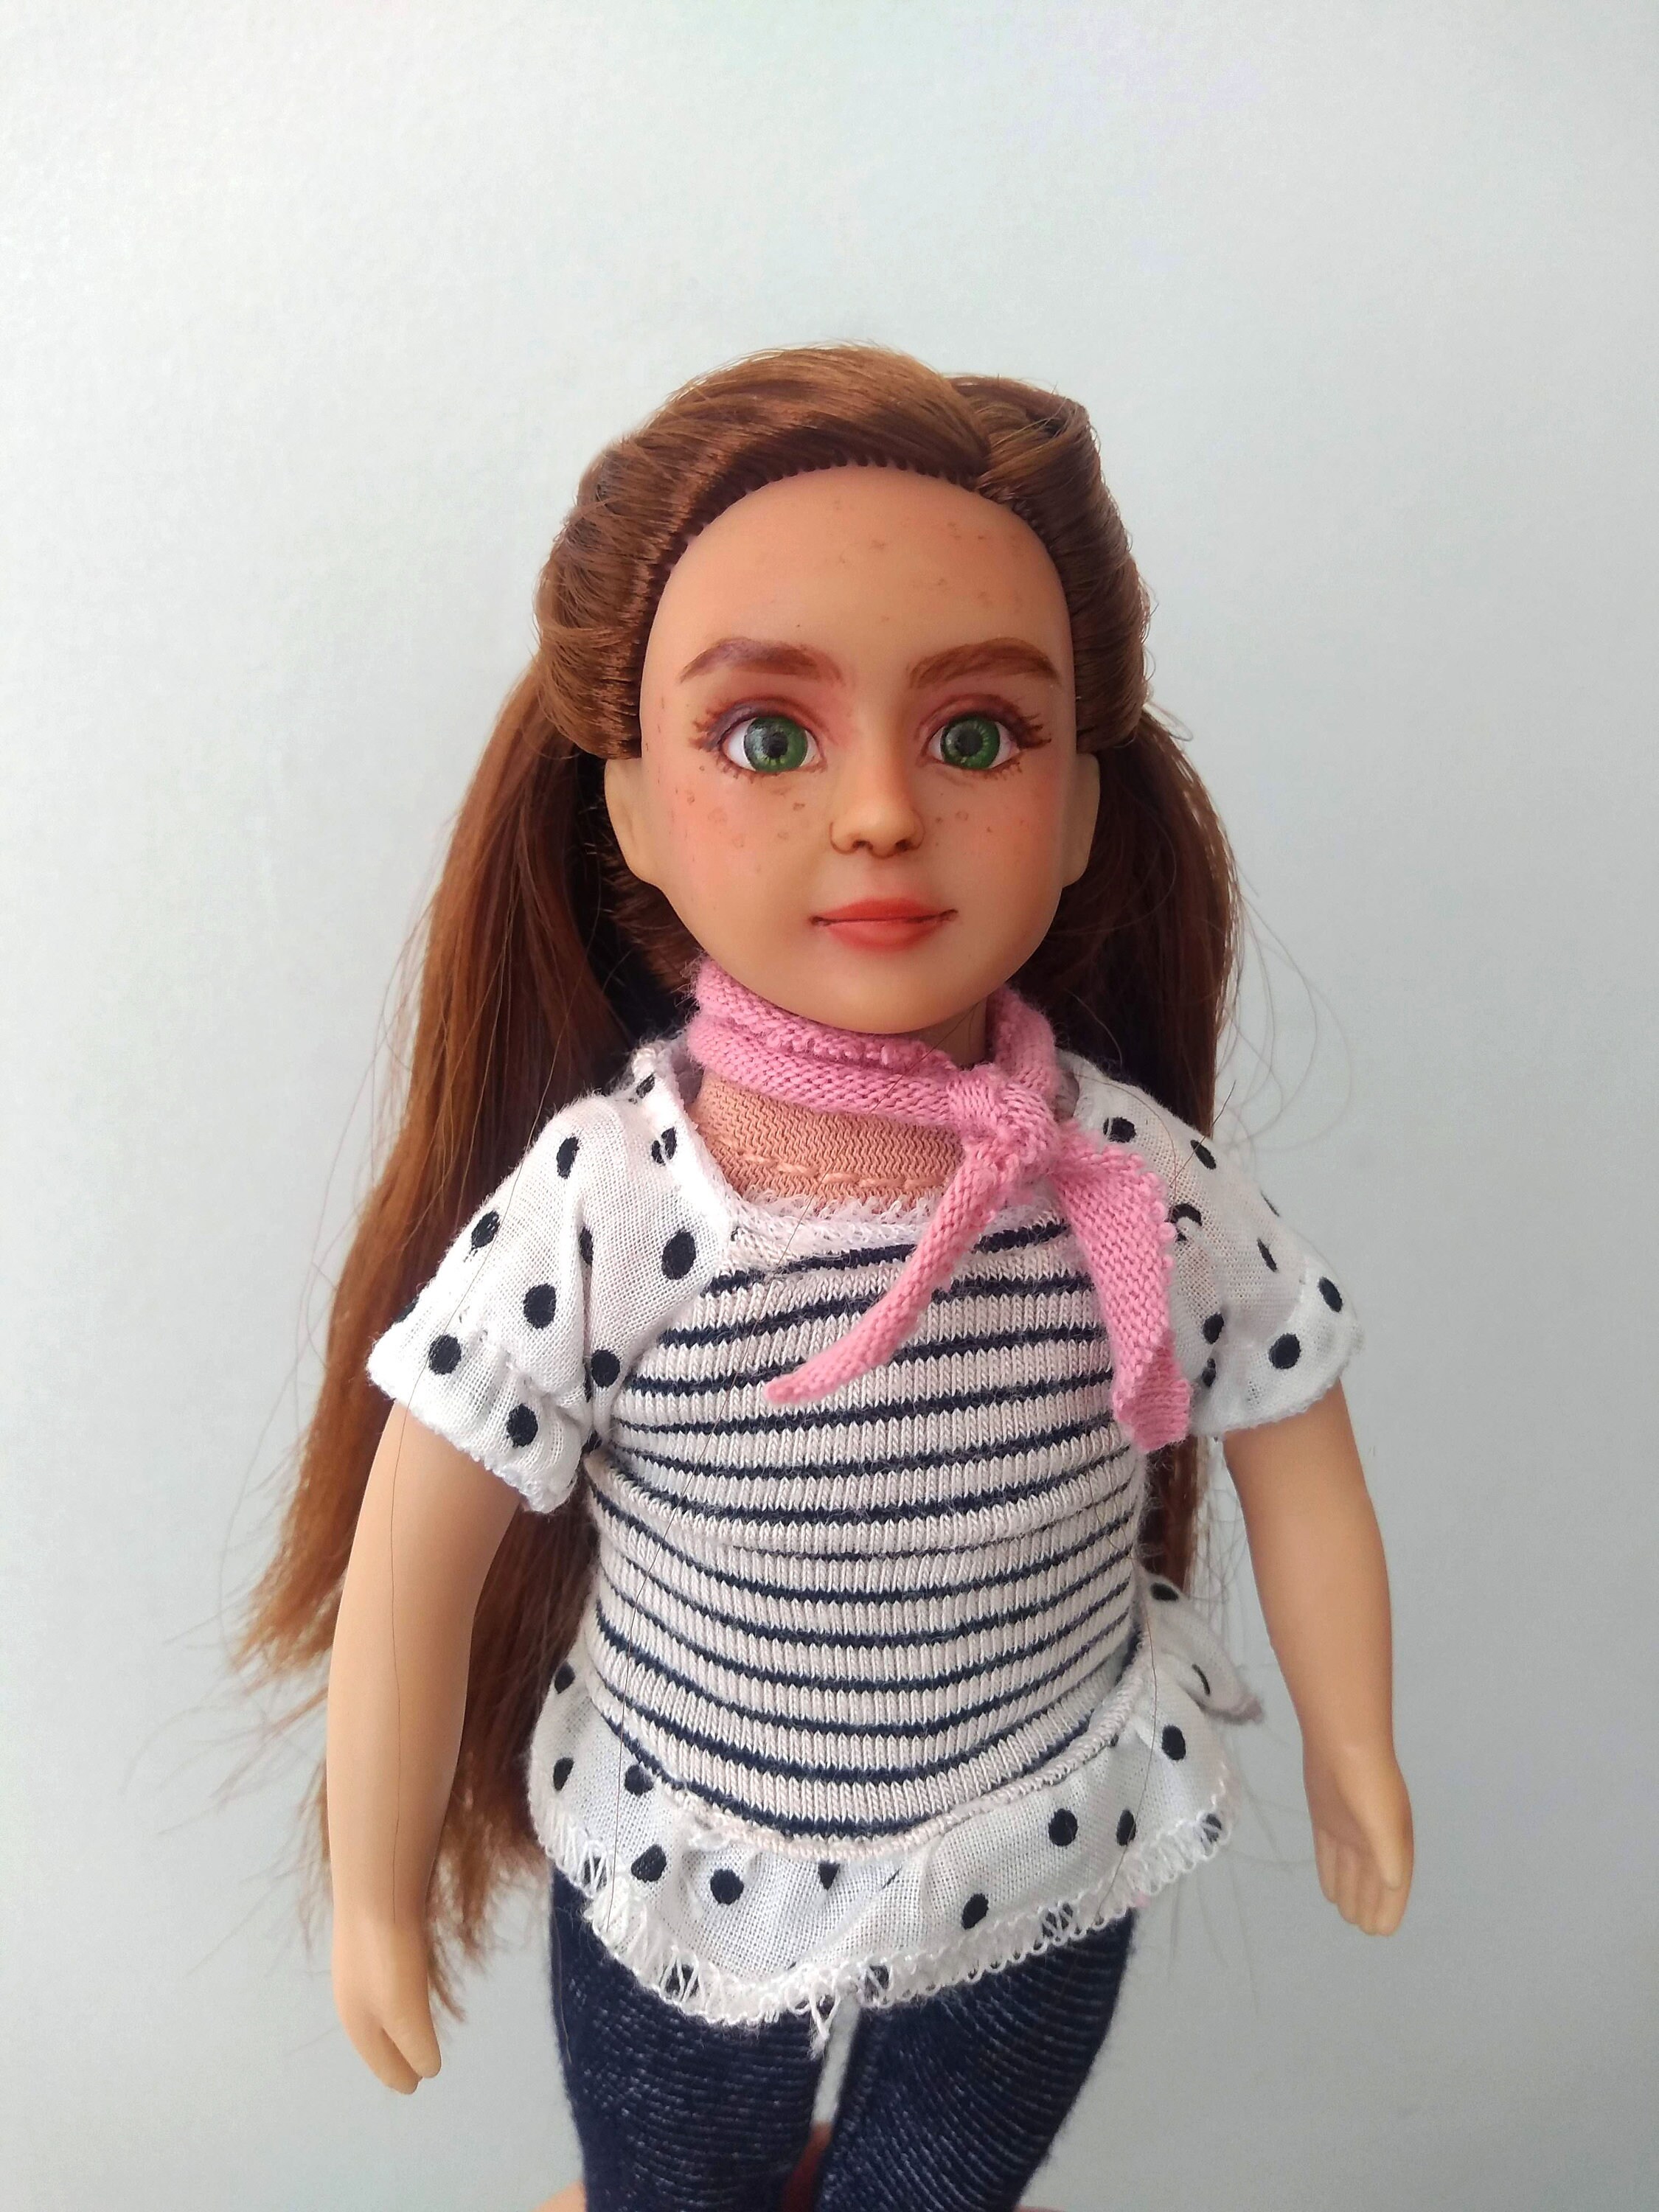 18"    HANDMADE SUMMER DOLLS CLOTHES FIT OUR GENERATION DESIGN A FRIEND 